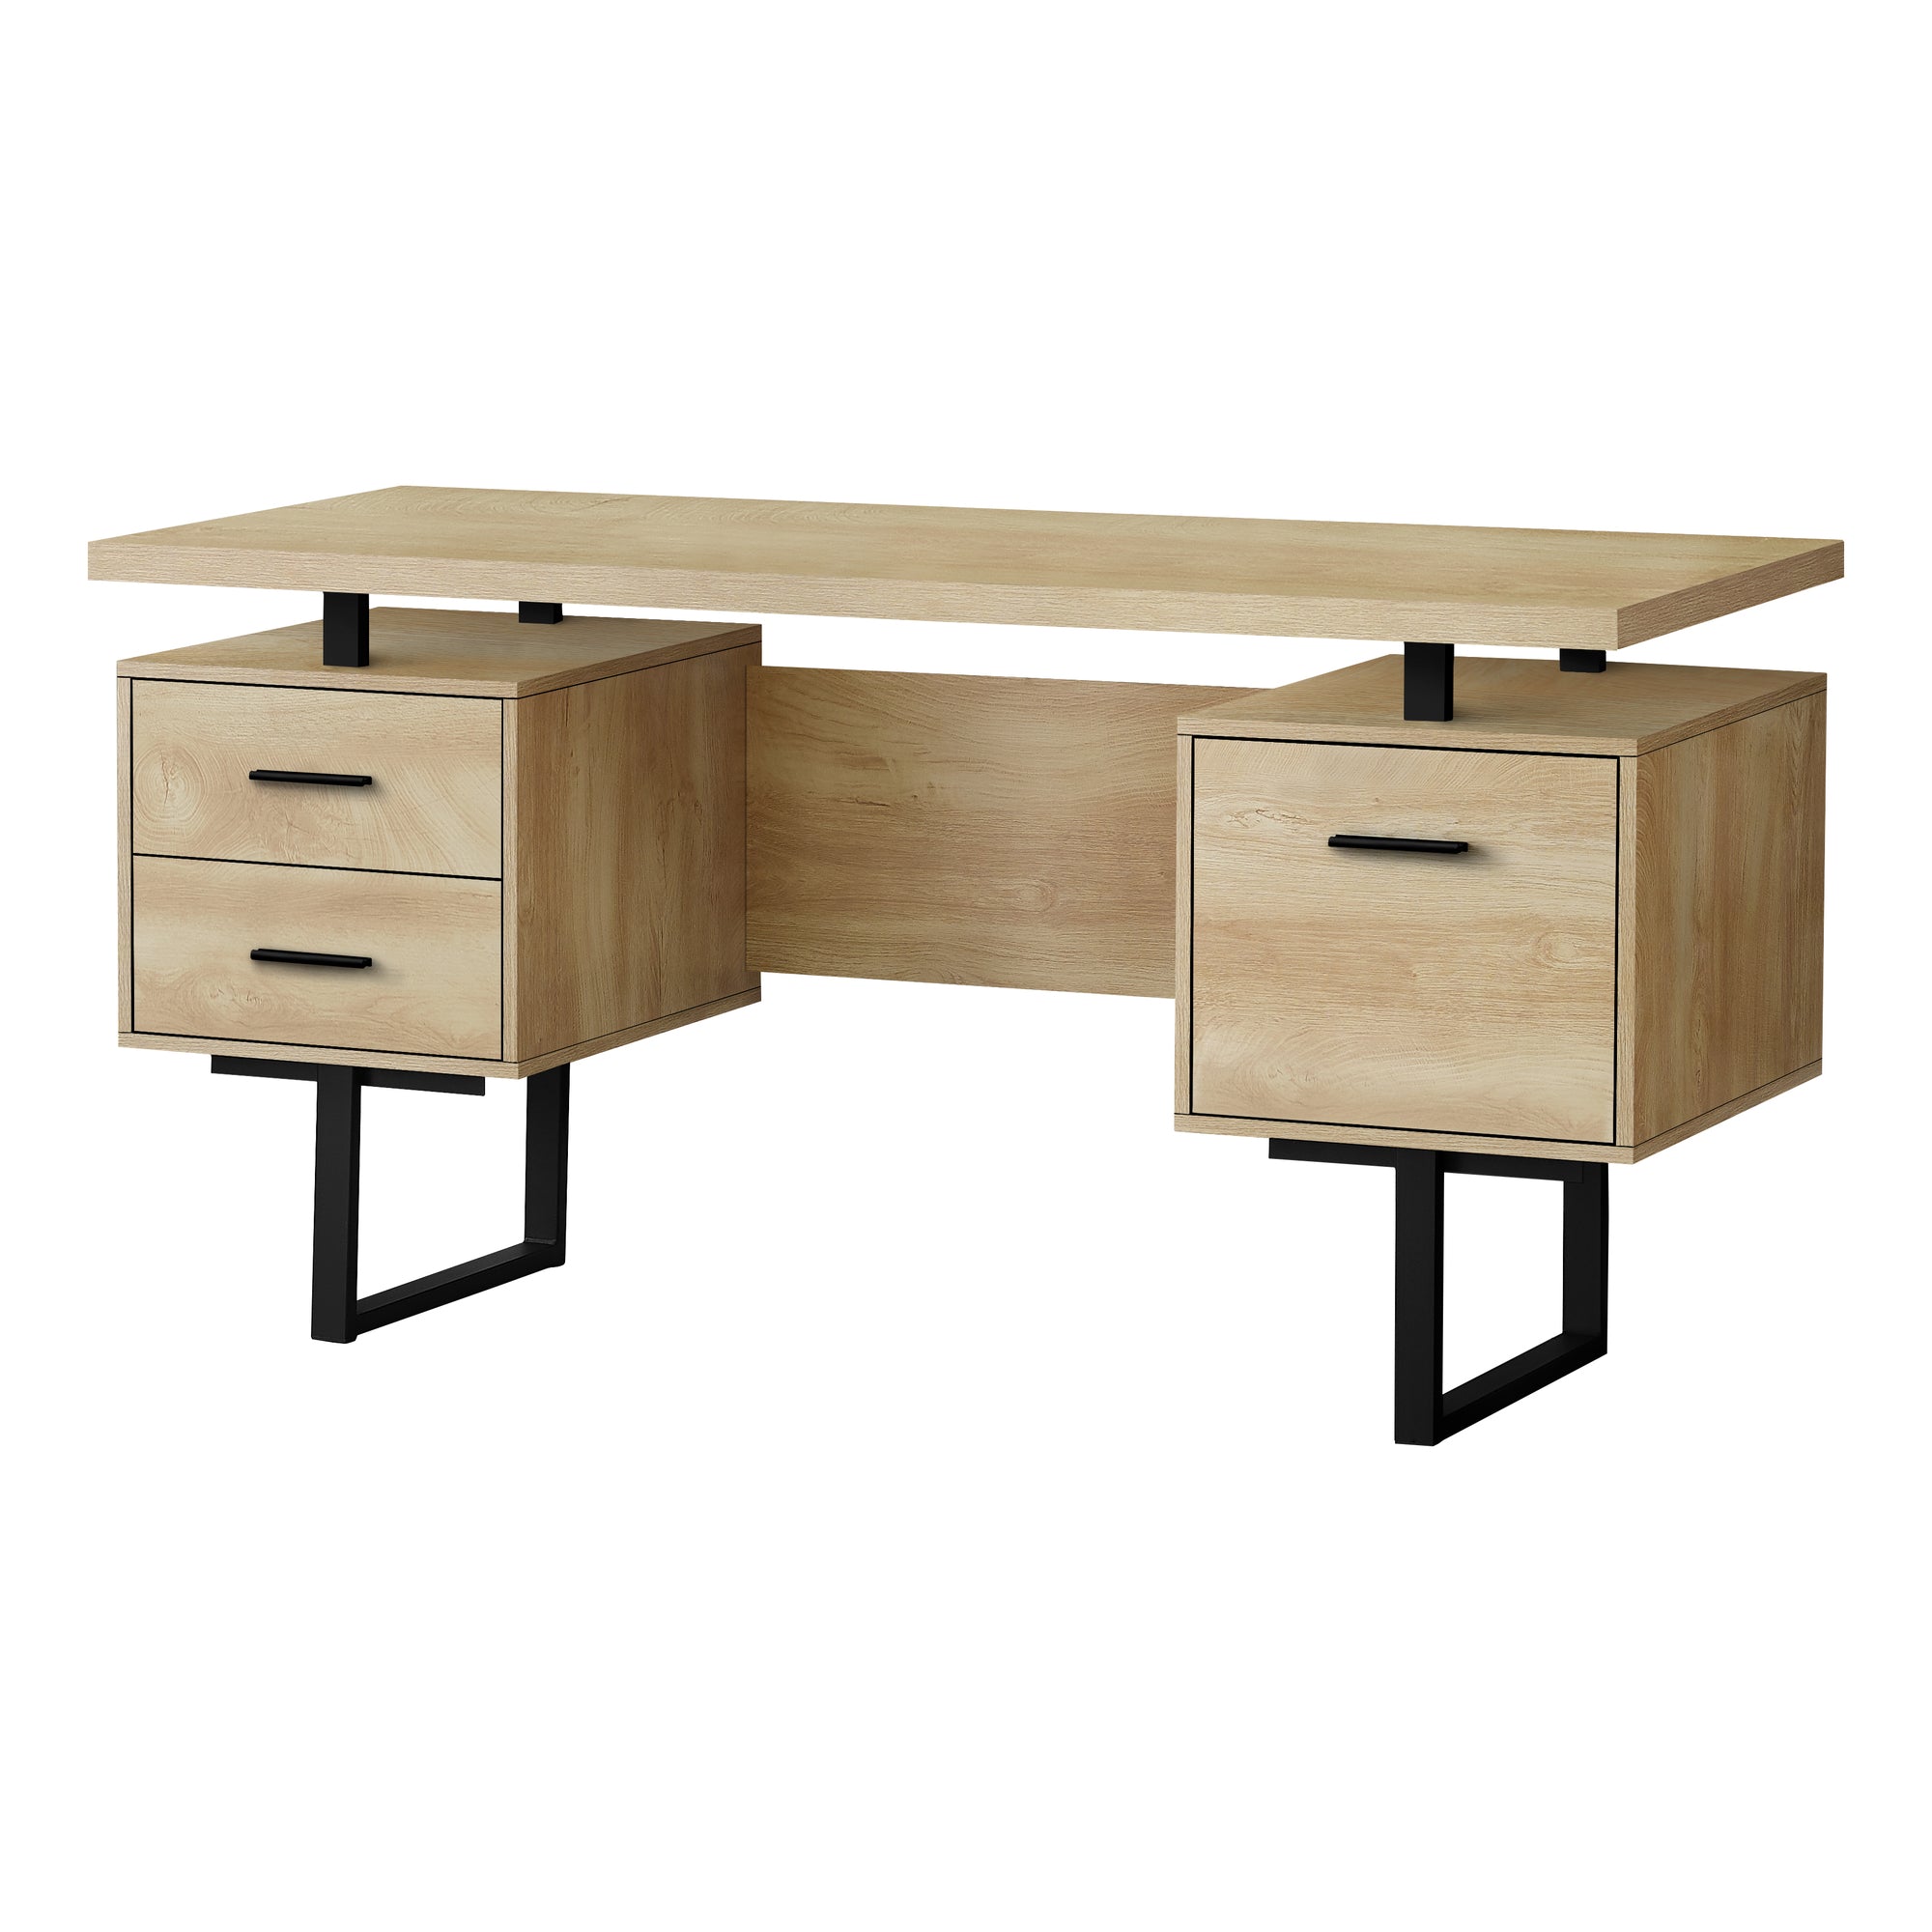 MN-397628    Computer Desk, Home Office, Laptop, Left, Right Set-Up, Storage Drawers, 60"L, Metal, Laminate, Natural, Black, Contemporary, Modern